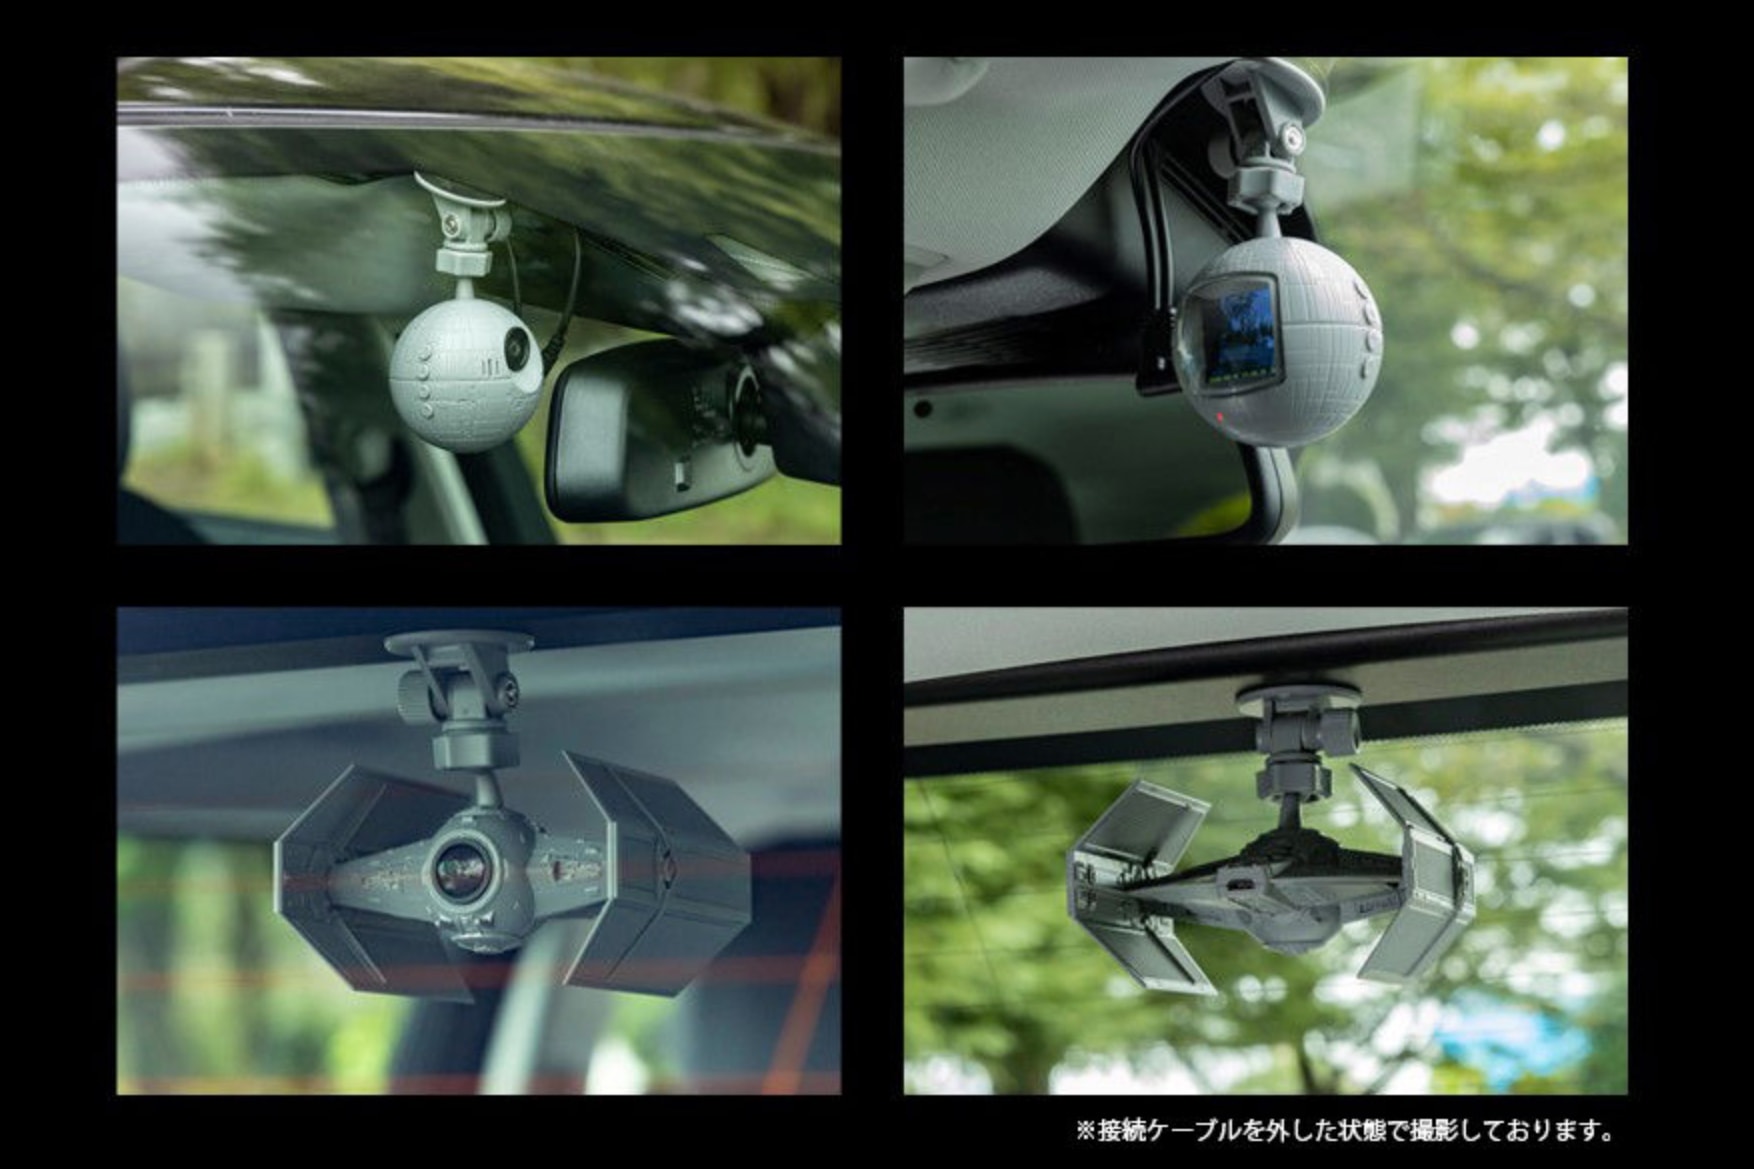 Harness the Force While Driving With Bandai's Death Star/TIE Fighter Dash Cams The Force Sith Empire weapons star destroyer Vader Japan Tokyo 